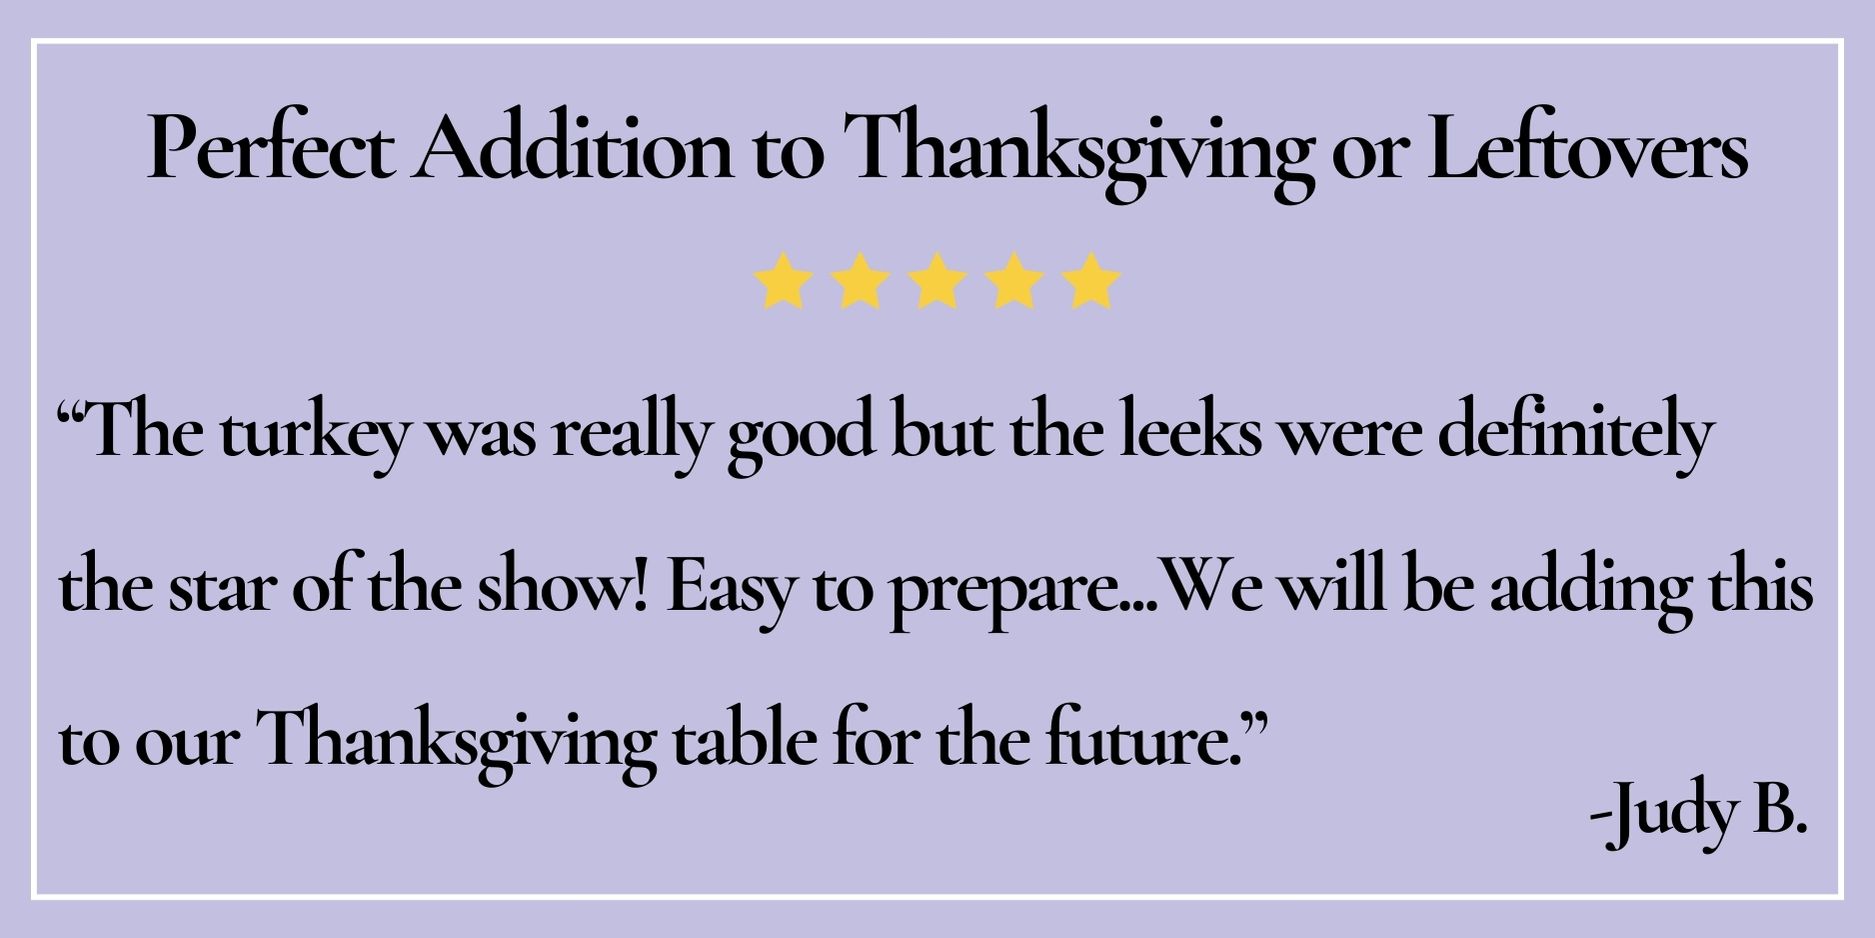 text box with paraphrase: Easy to prepare...We will be adding this to our Thanksgiving table for the future. -Judy B.